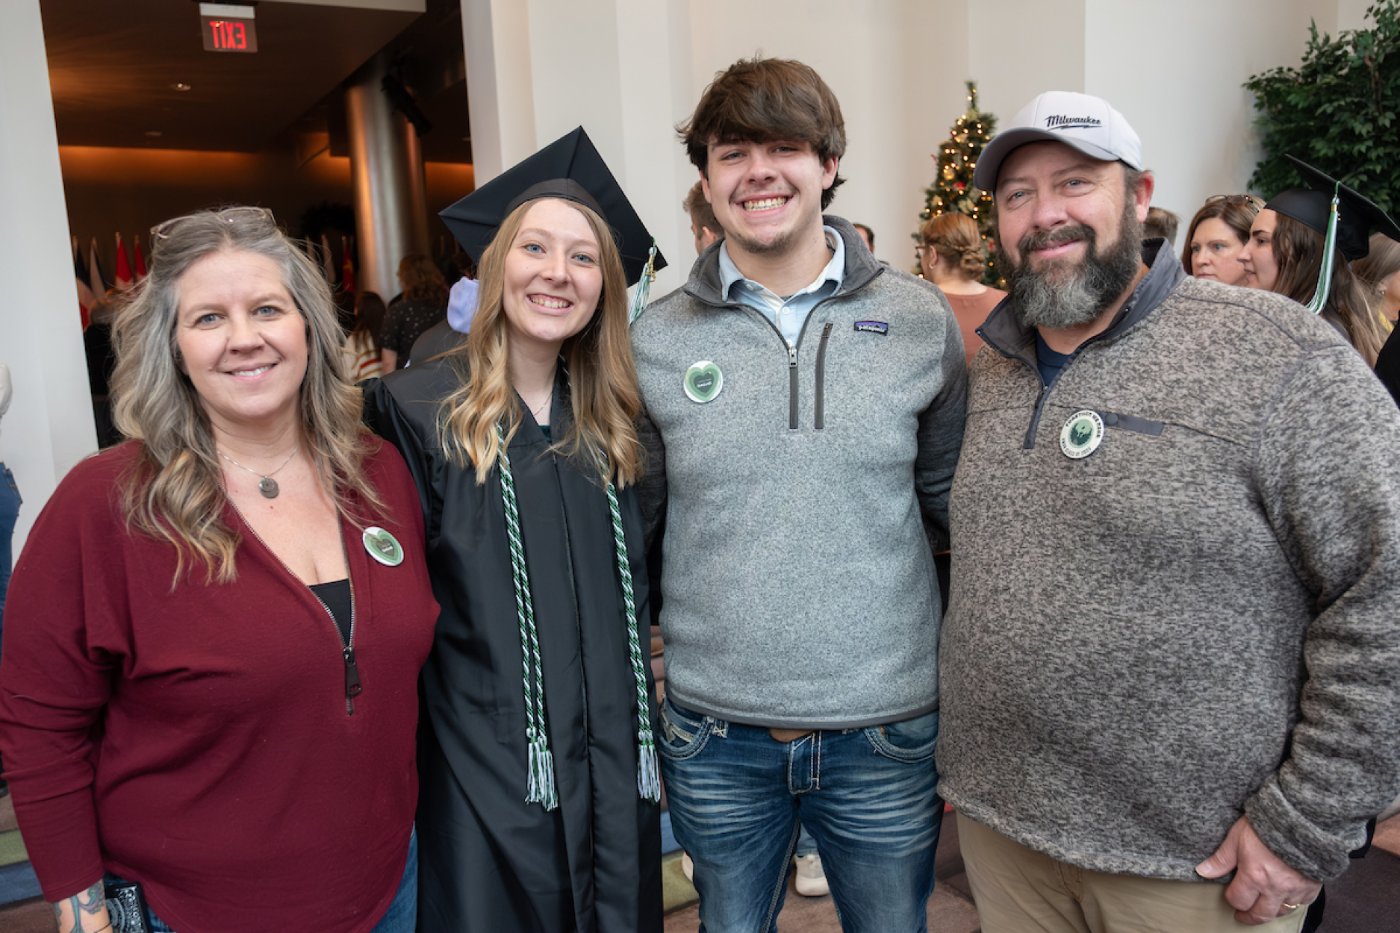 A family of four, including a recent UW-Green Bay graduate, pose for a photo after a Commencement ceremony.